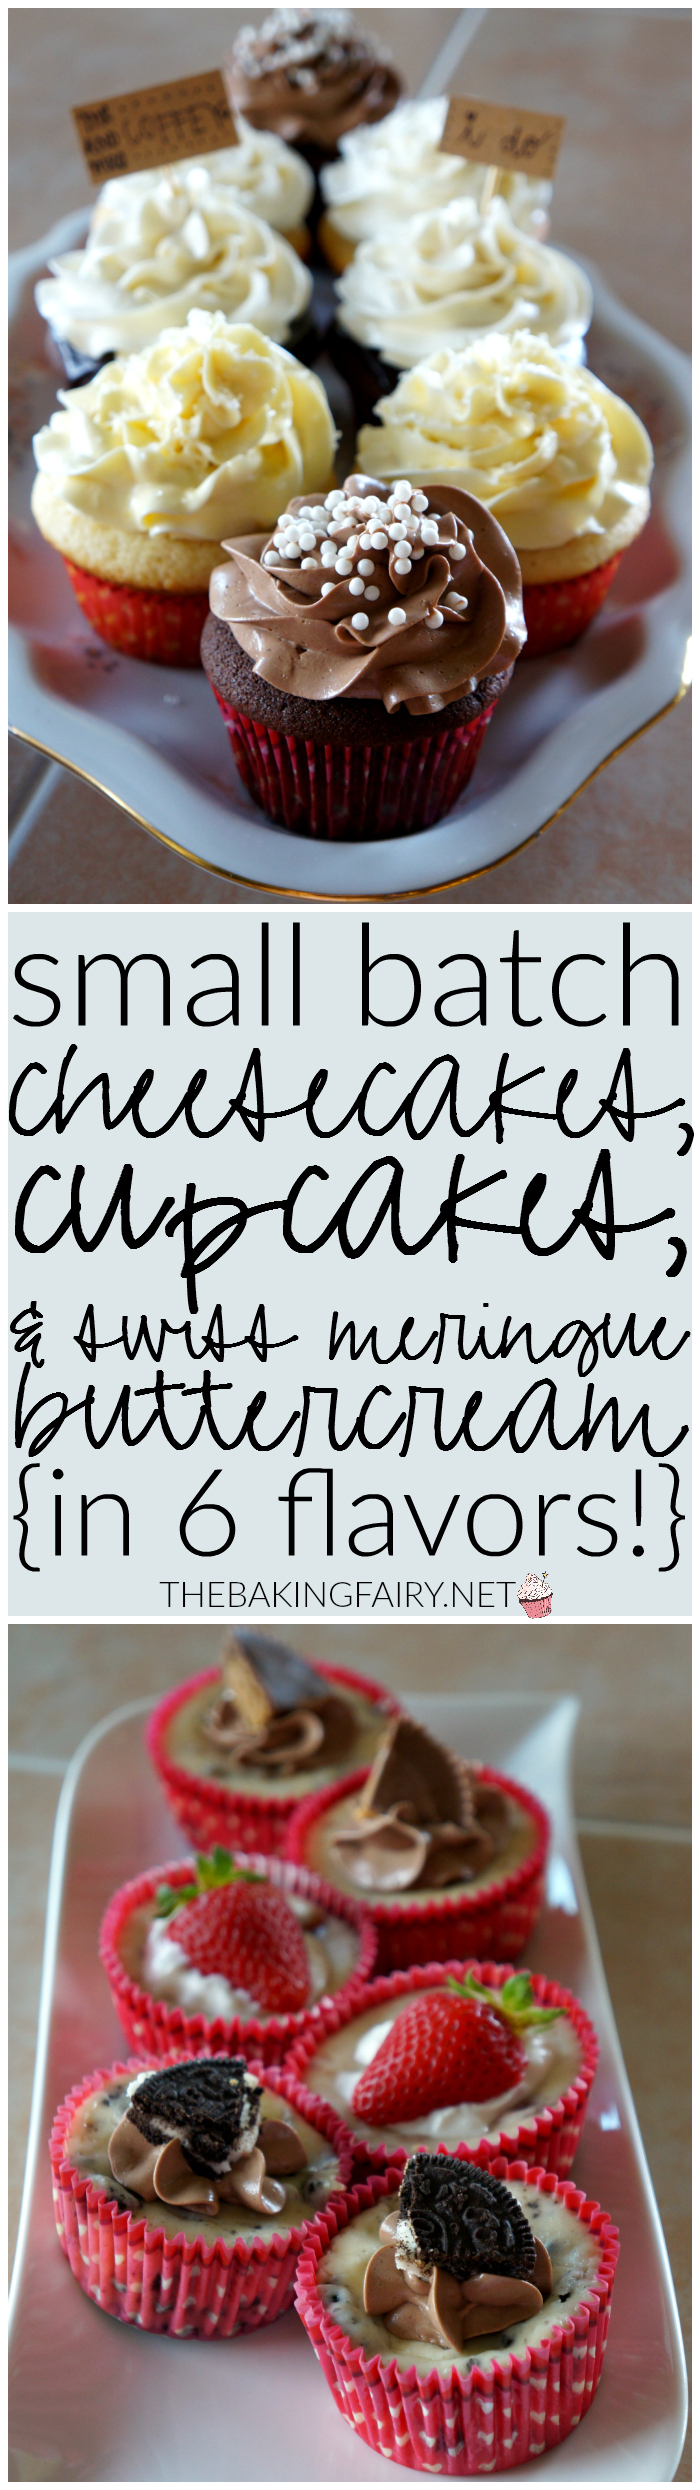 small batch cheesecakes, cupcakes, and buttercream | The Baking Fairy